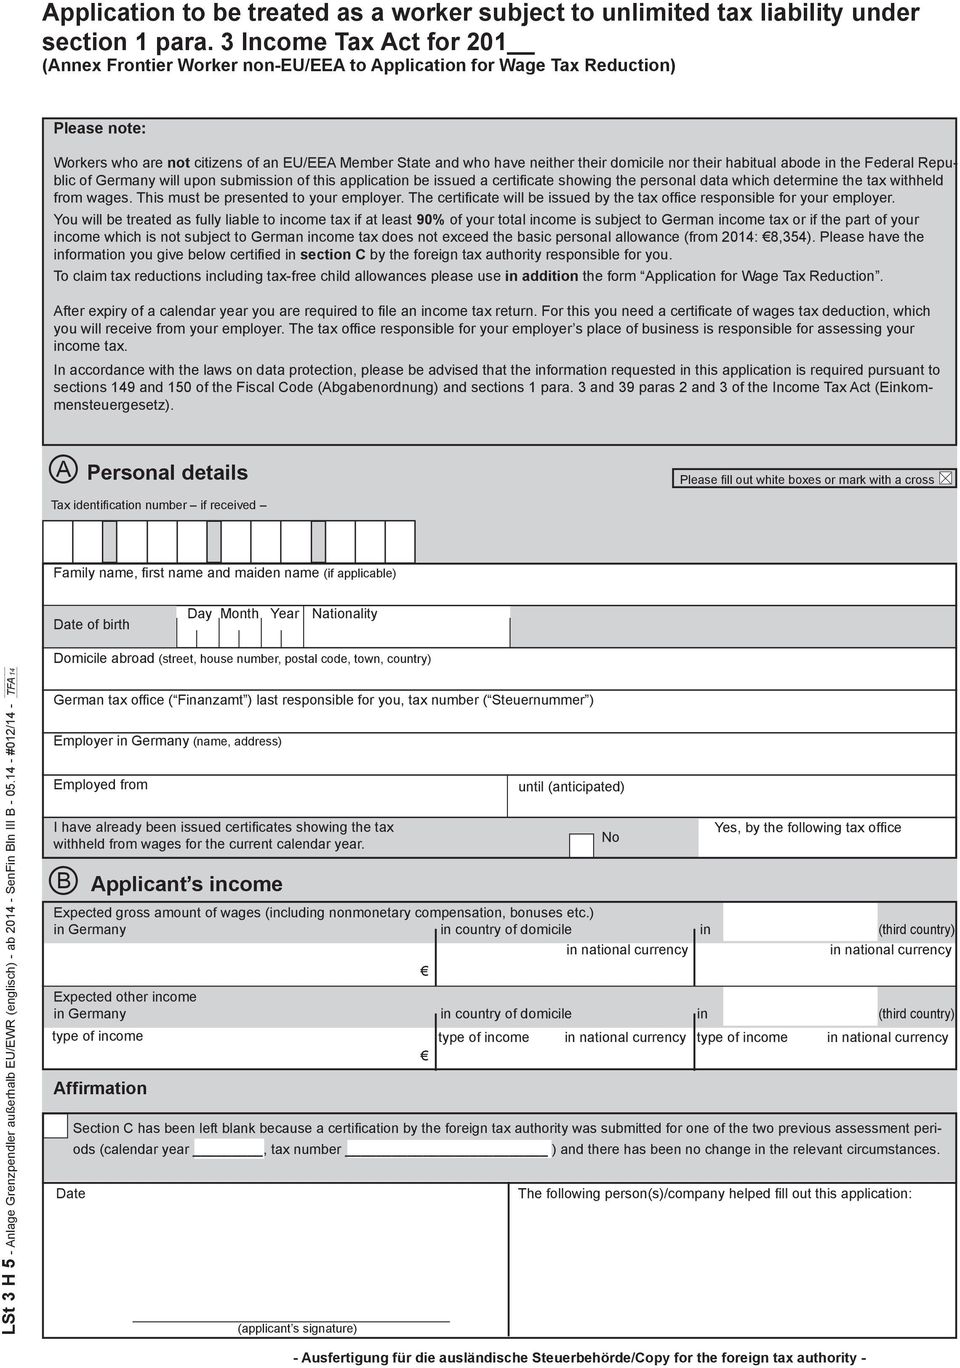 domicile nor their habitual abode in the Federal Republic of Germany will upon submission of this application be issued a certificate showing the personal data which determine the tax withheld from